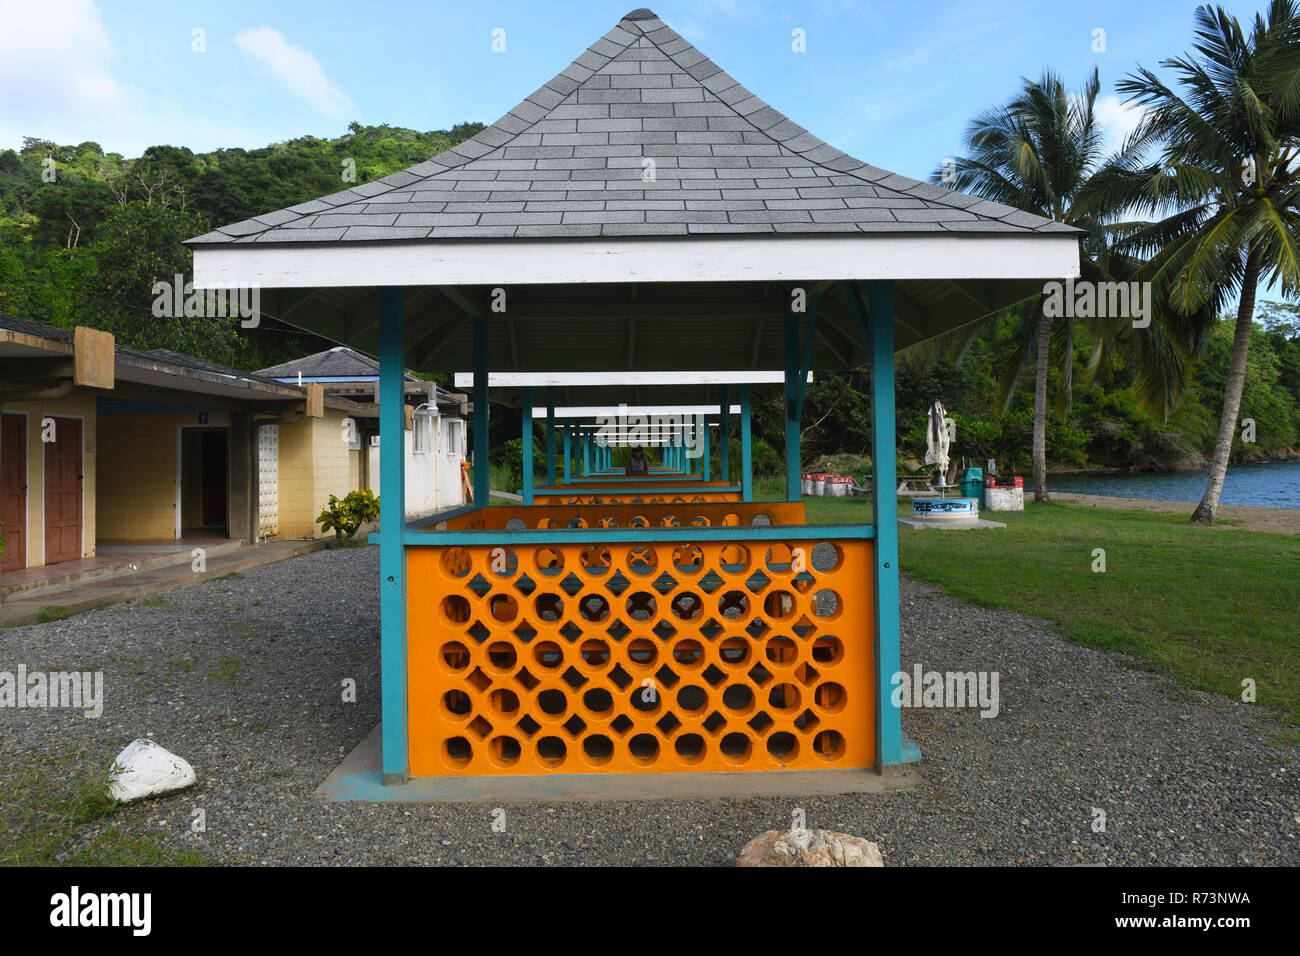 Well established picturesque beach resort with picnic, resting sheds and conveniences in northern Tobago around beautiful mountainous surroundings. Stock Photo